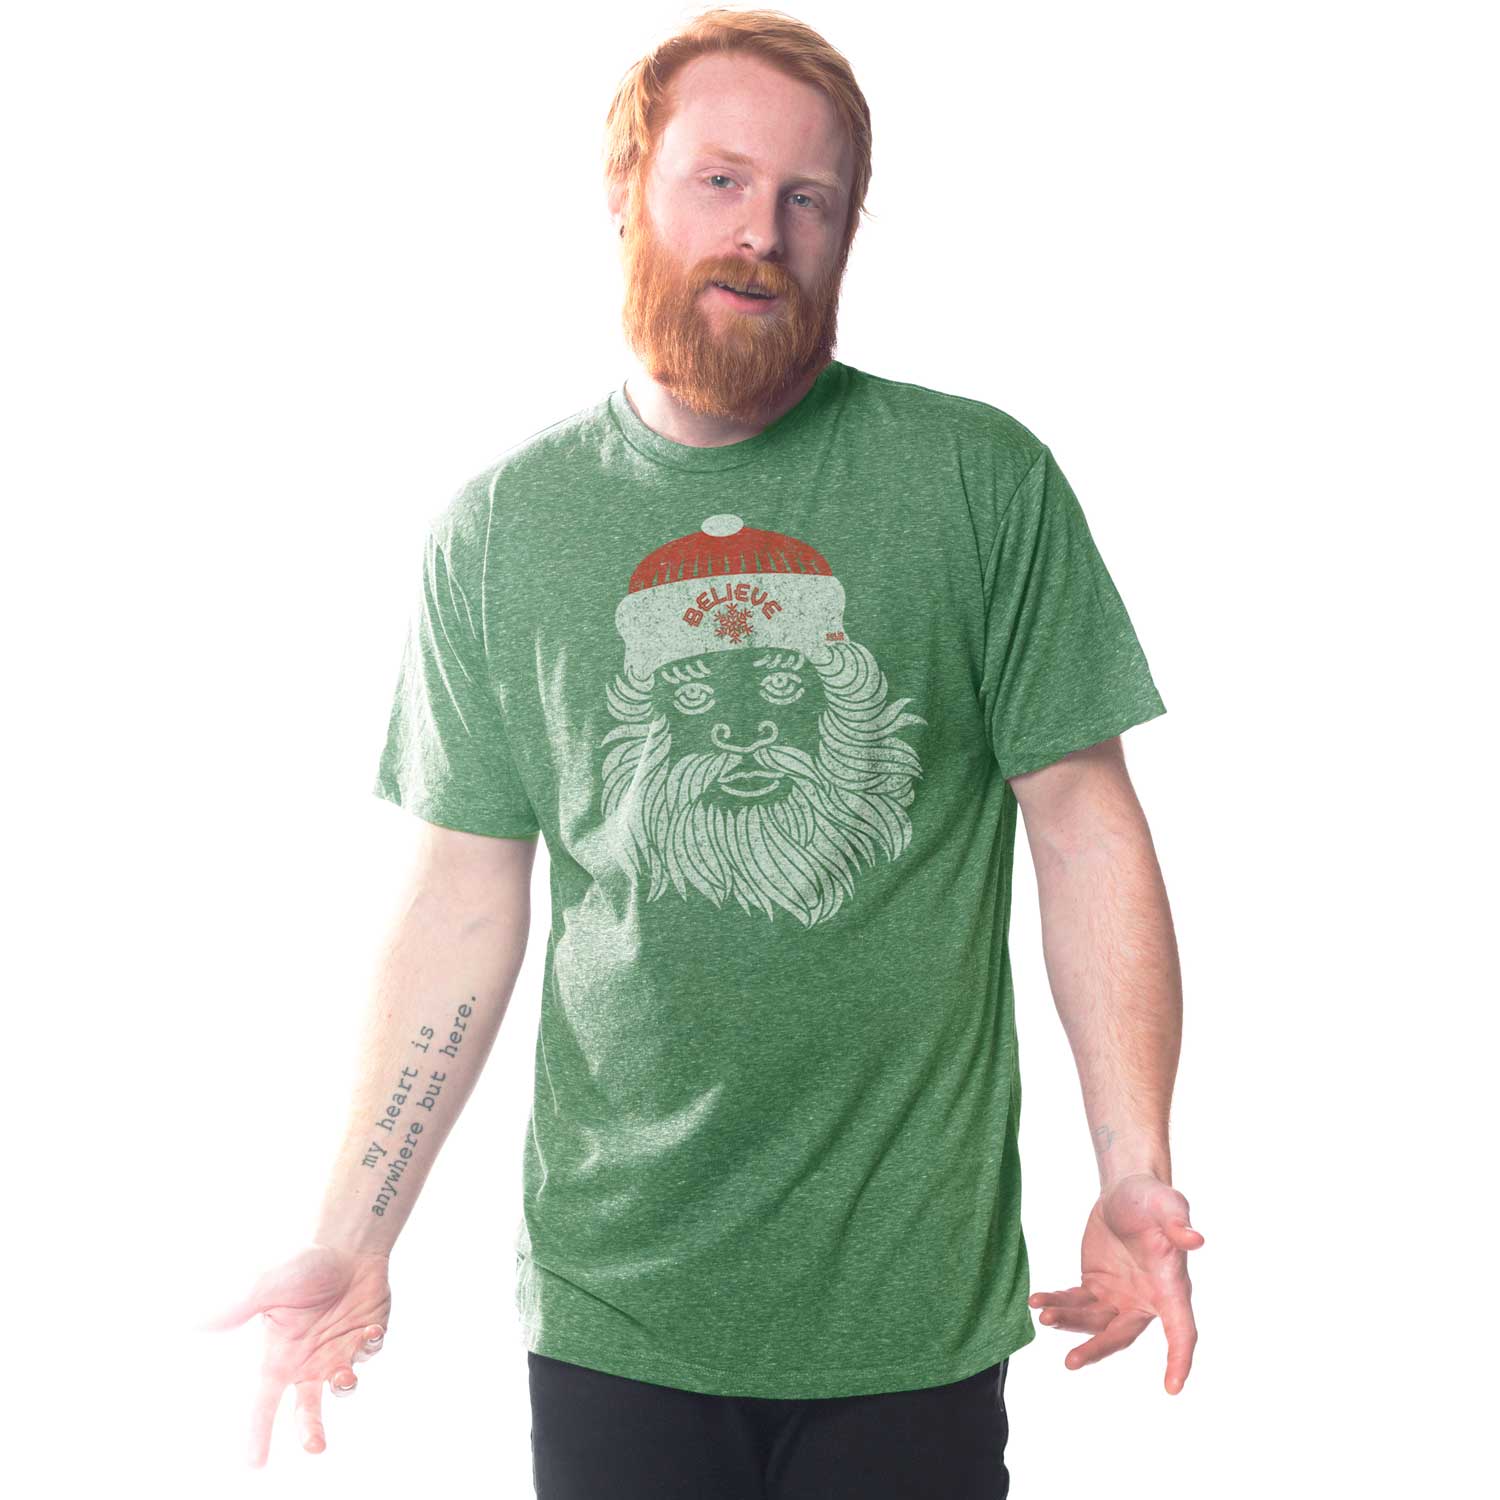 Believe in Santa Retro T-Shirt | Cool Funny Christmas Graphic | SOLID THREADS - Solid Threads